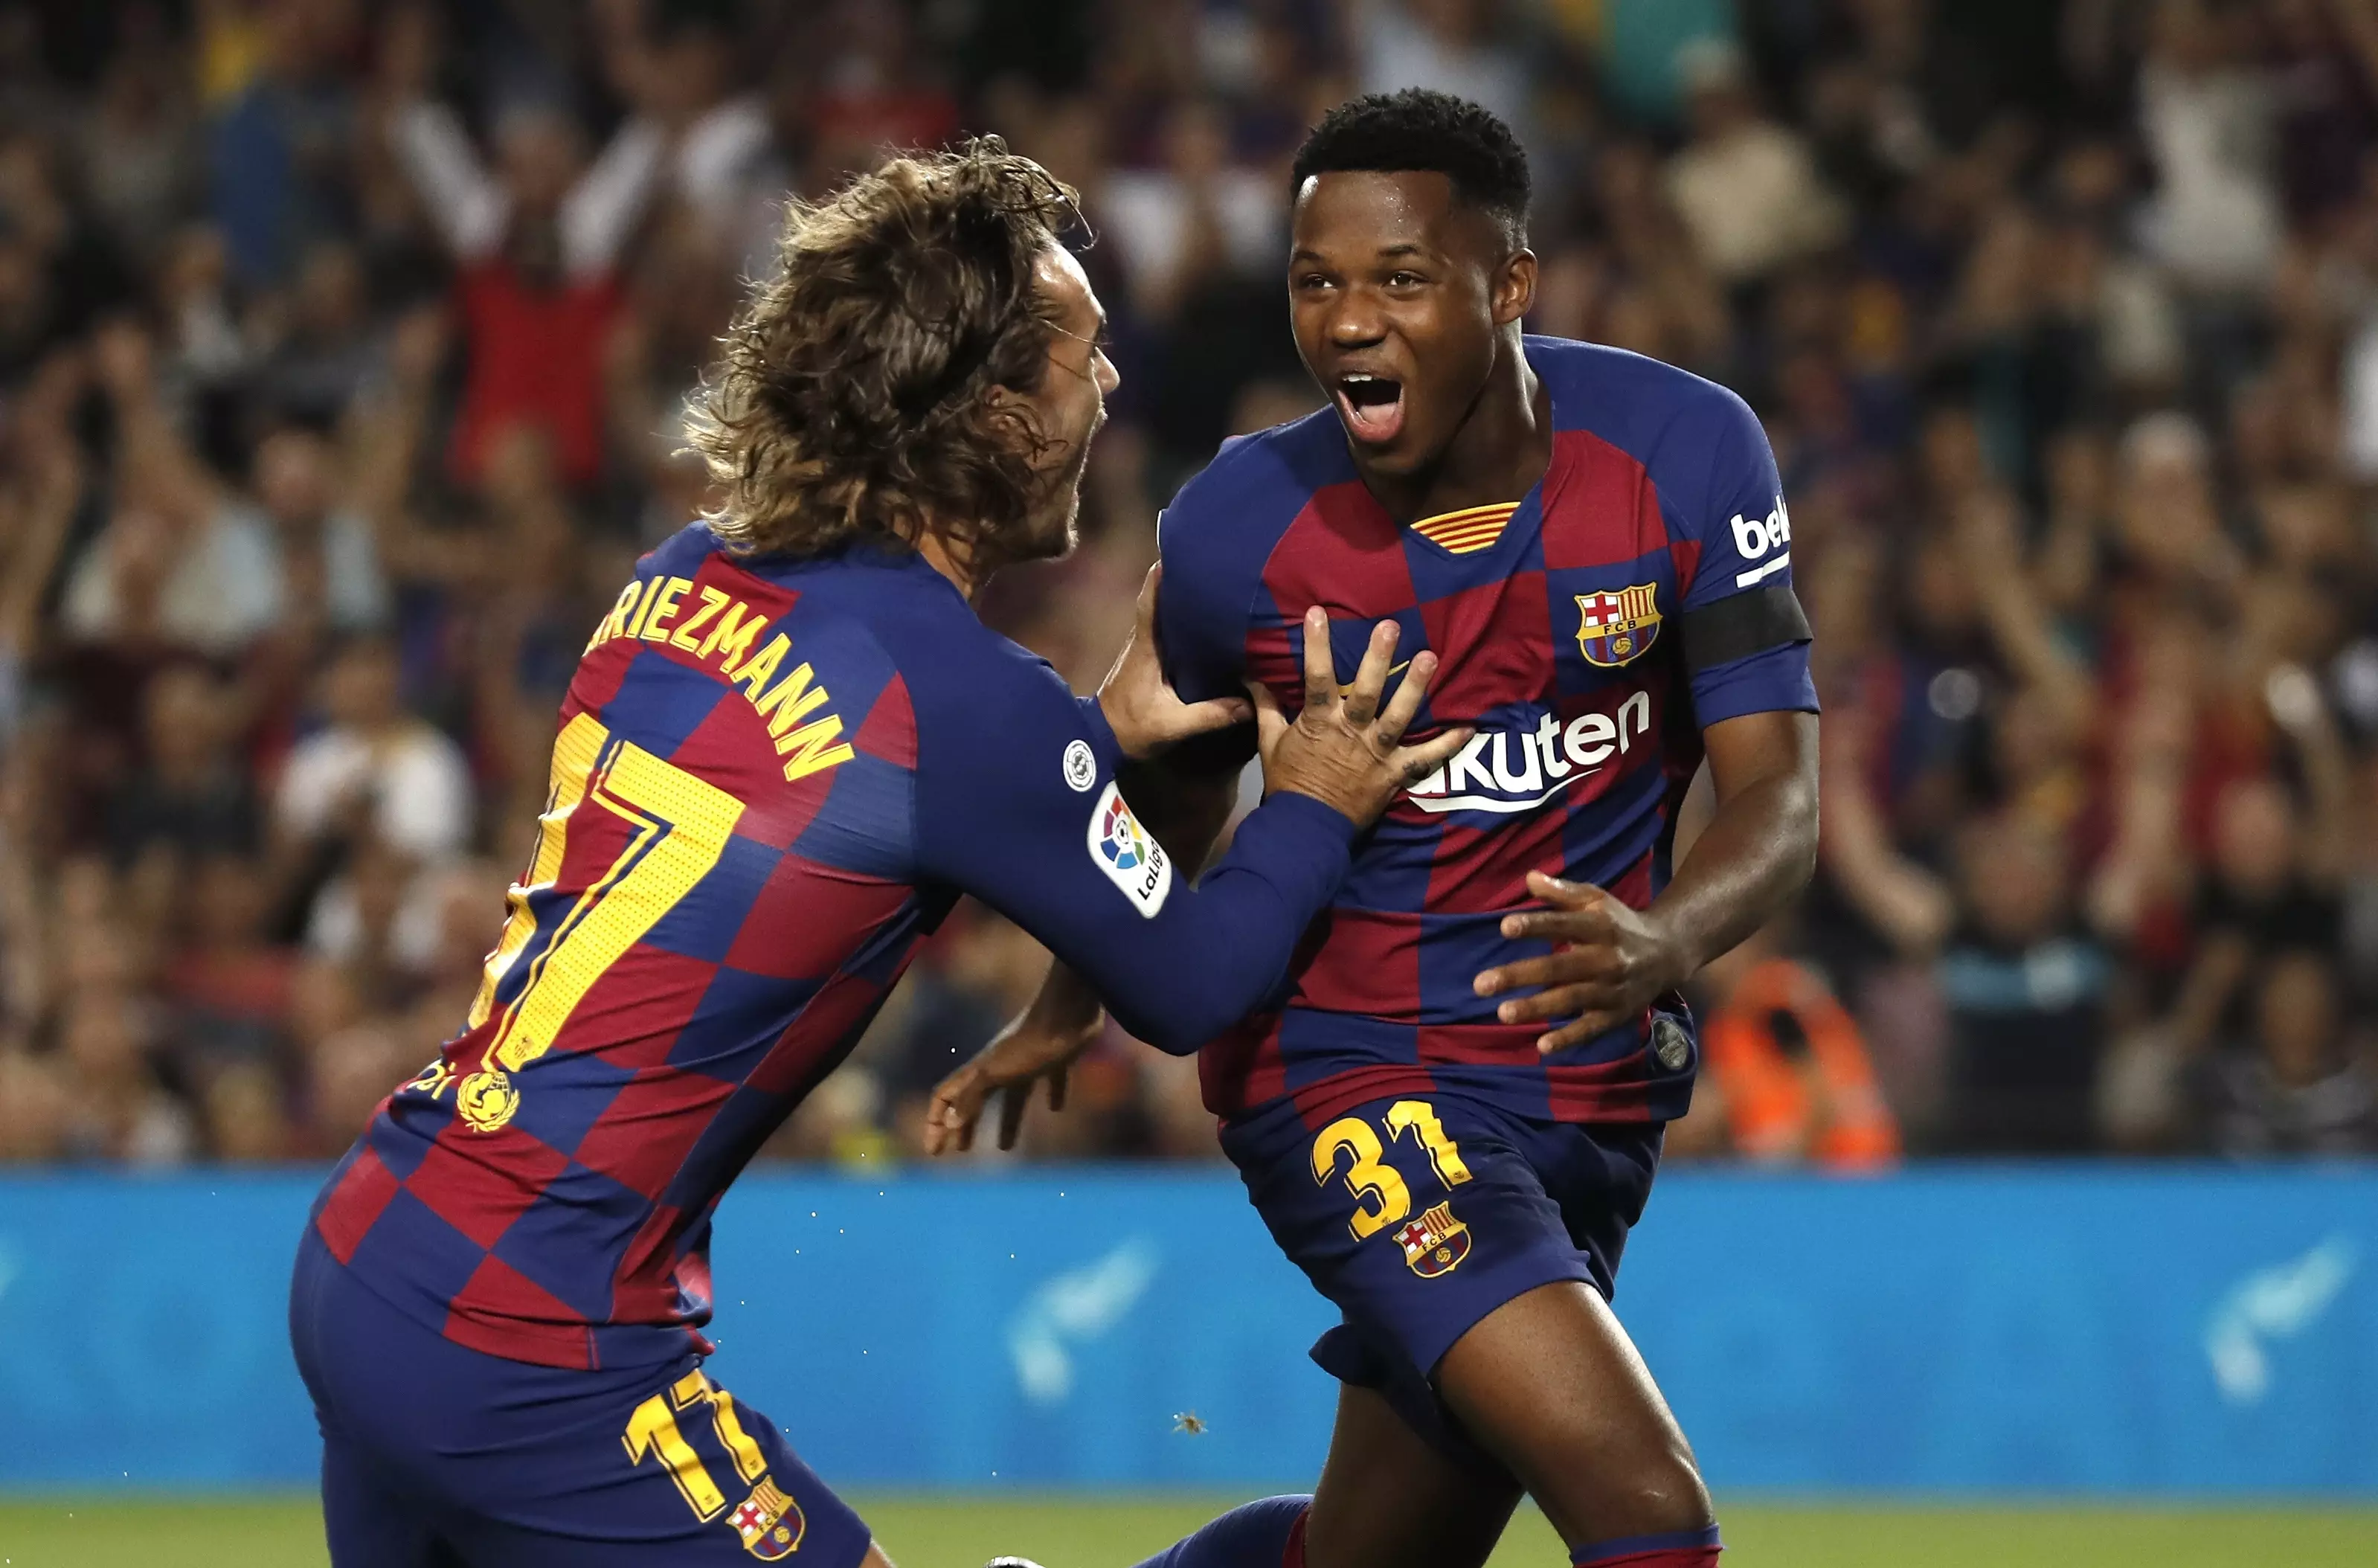 Ansu Fati has already scored important goals for Barca. Image: PA Images